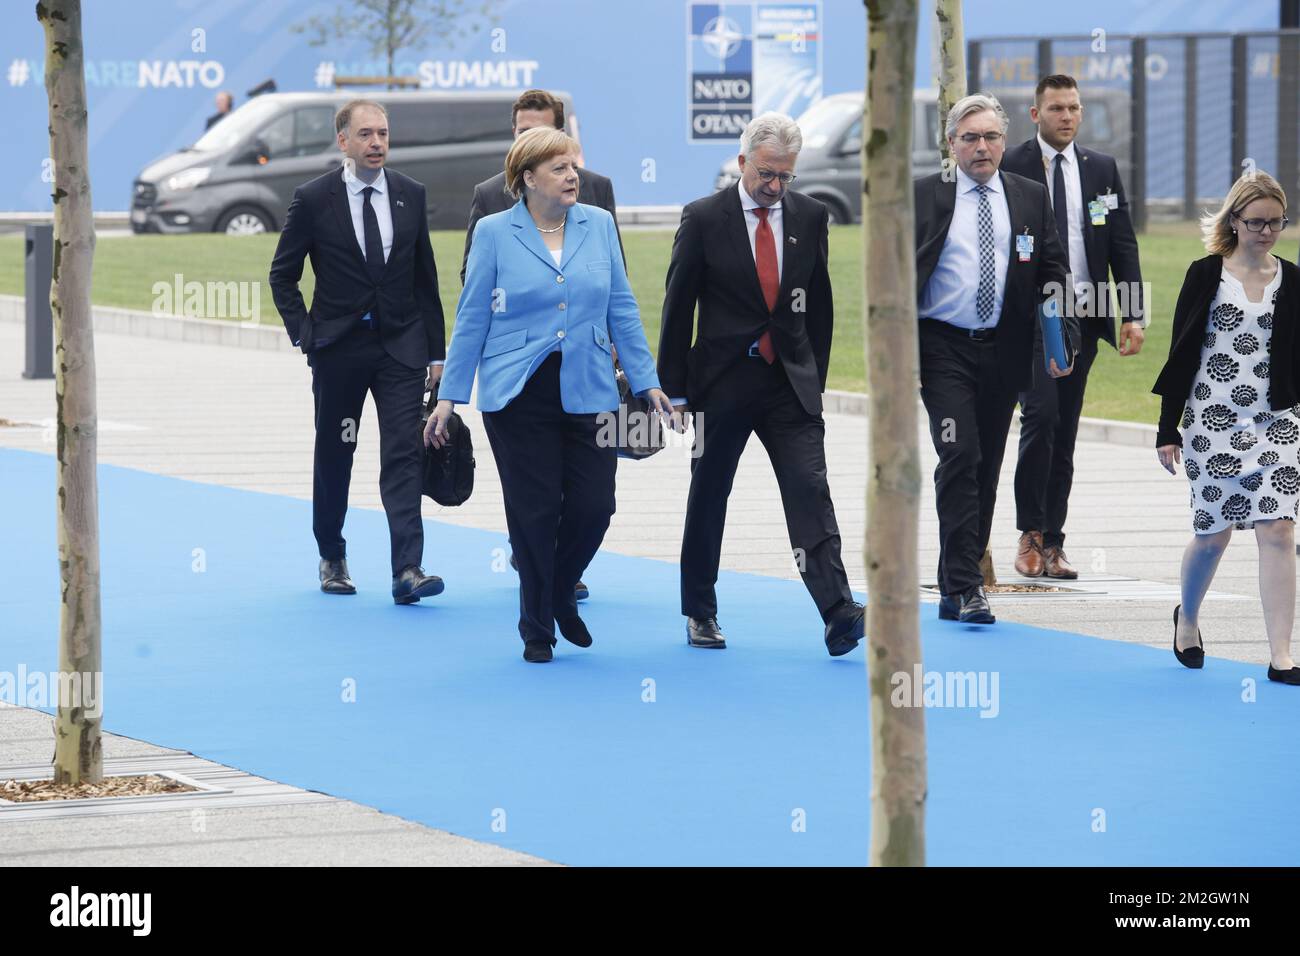 Chancellor of Germany Angela Merkel (C) pictured at the arrivals on day two of a summit of the NATO (North Atlantic Treaty Organization) military alliance, Thursday 12 July 2018, in Brussels. BELGA PHOTO POOL PABLO GARRIGOS CUCARELLA  Stock Photo